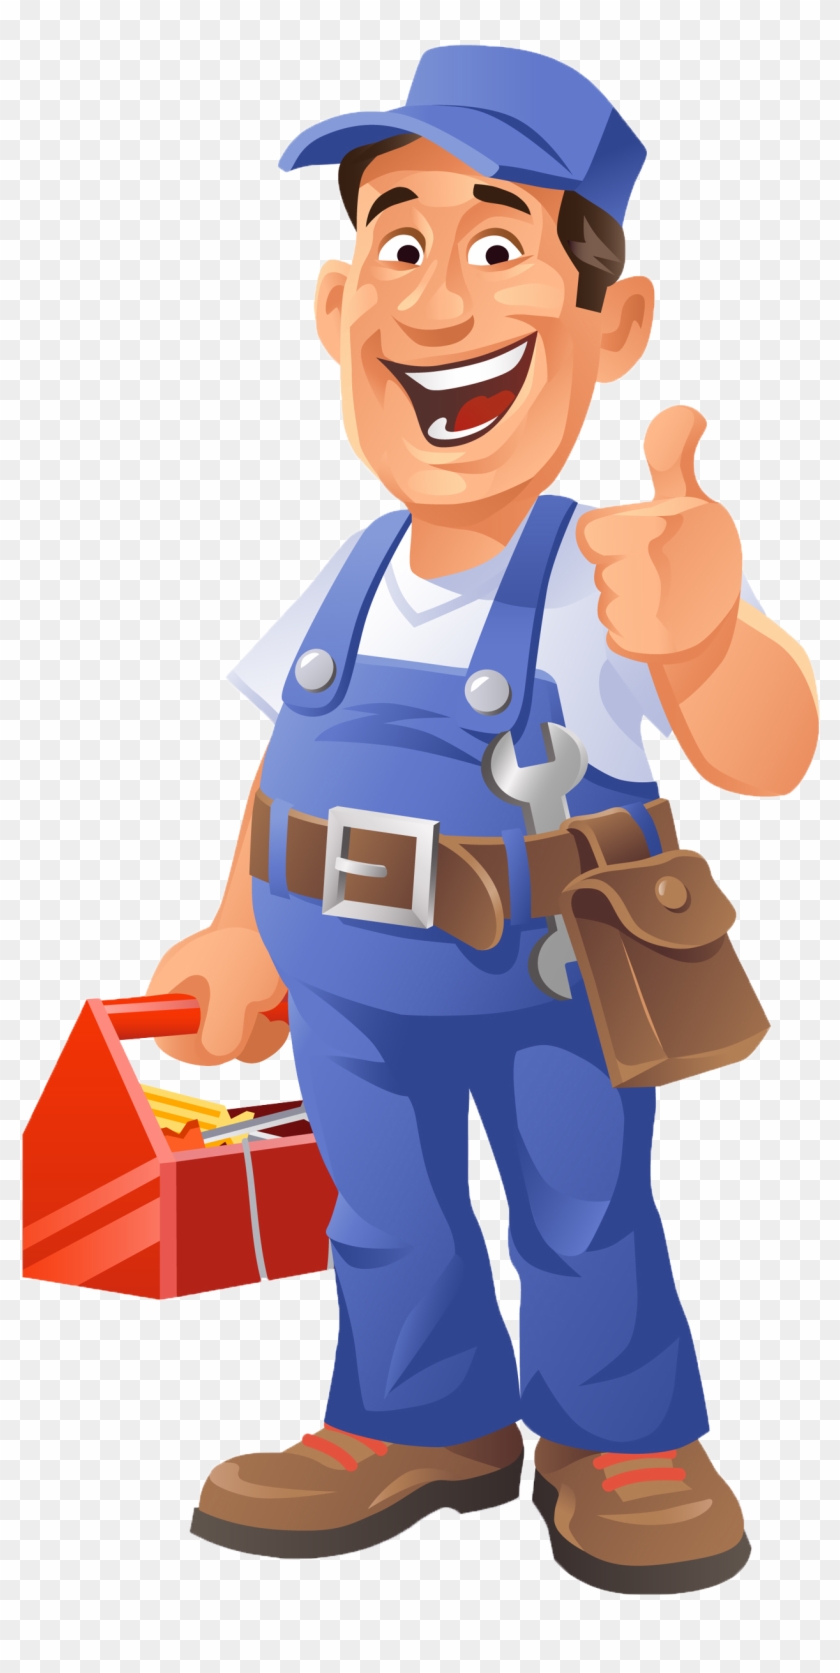 Future Services Provides 24 Hours Licensed Electrical - Repairman Clipart #914912